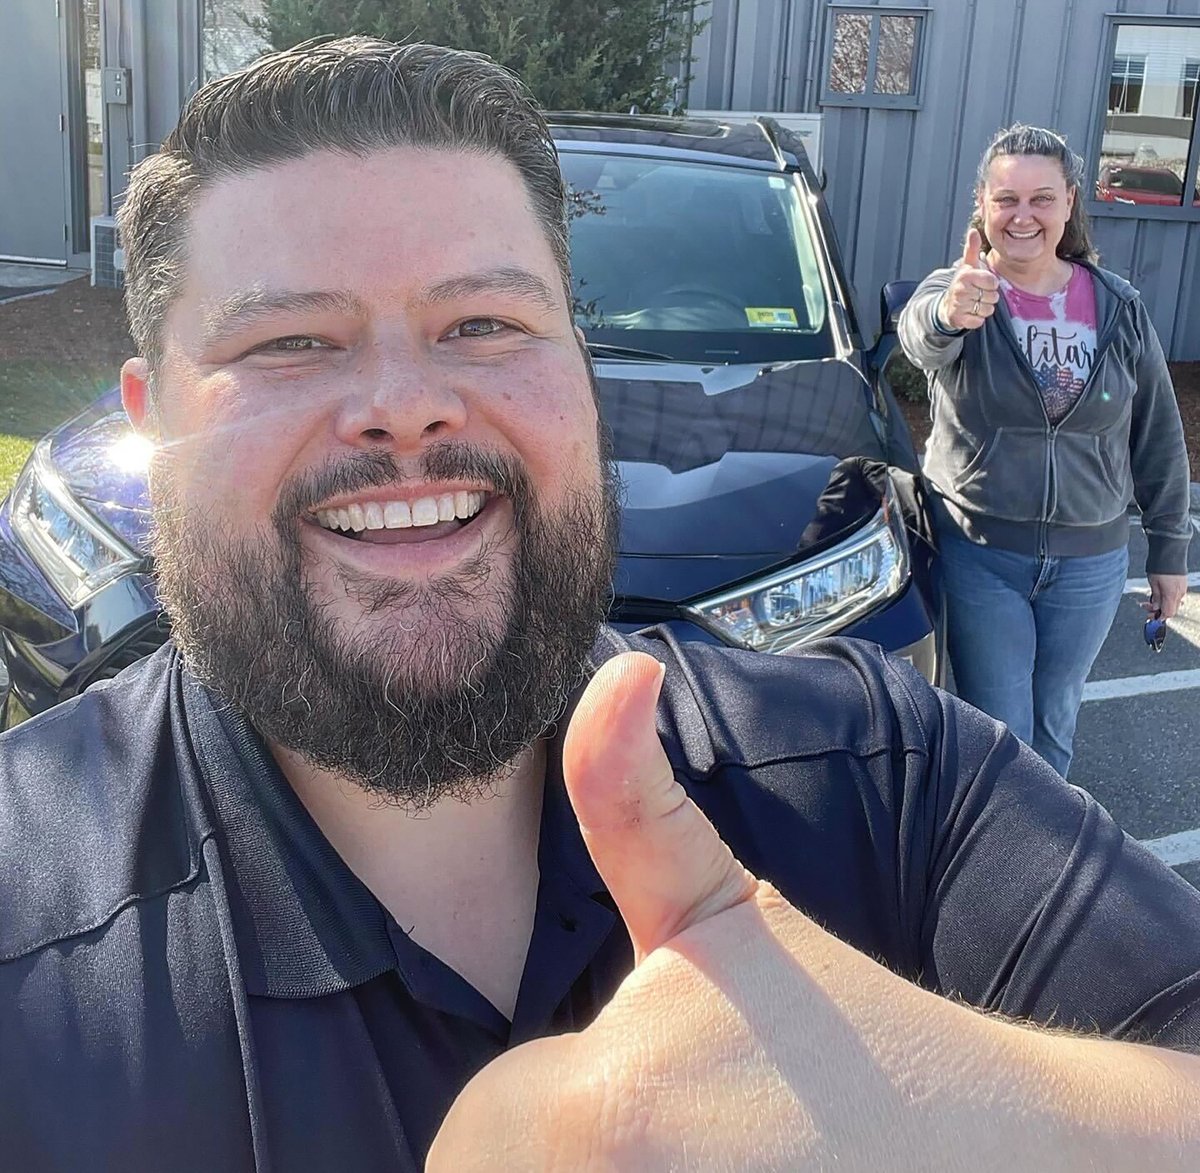 Happy #NewCarDay to Angela! She couldn't wait to take home the beautiful new @Toyota RAV4 she picked out with Brian Moore - Congrats!

Learn more about Brian & check out his reviews on @DealerRater: bit.ly/46KW7VN

#Toyota #LetsGoPlaces #RAV4